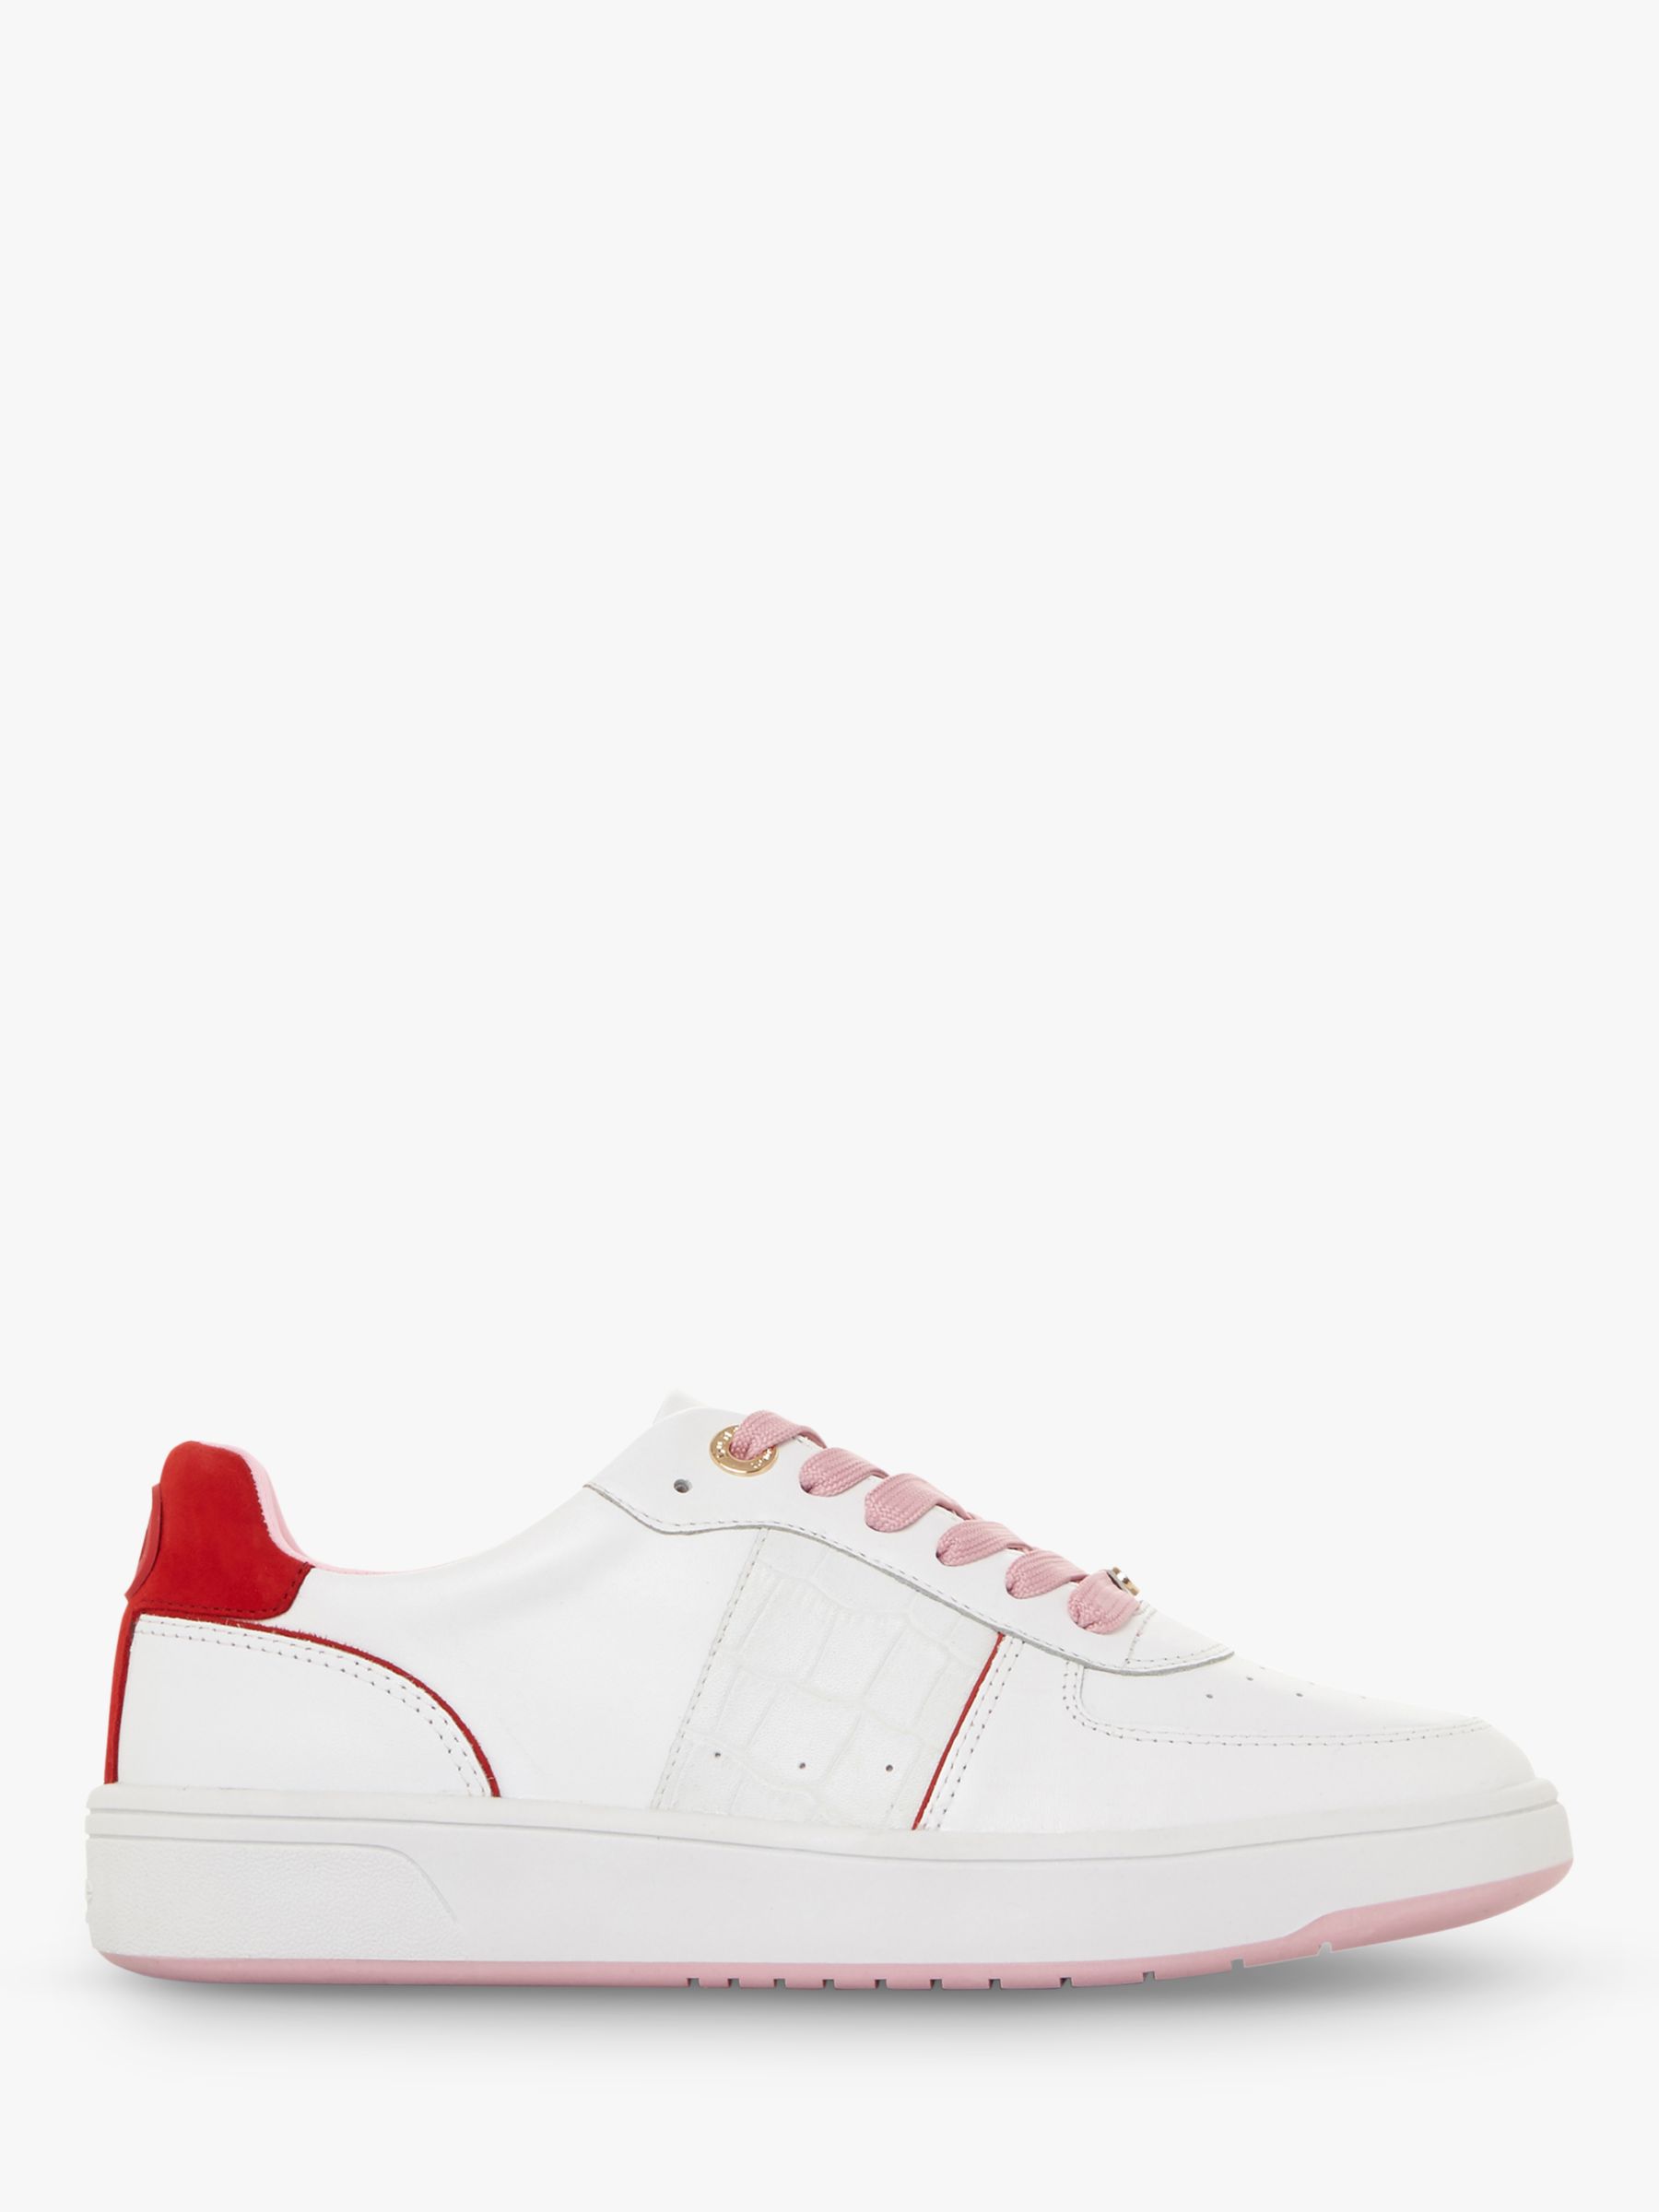 Dune Empress Low Top Trainers, White Leather